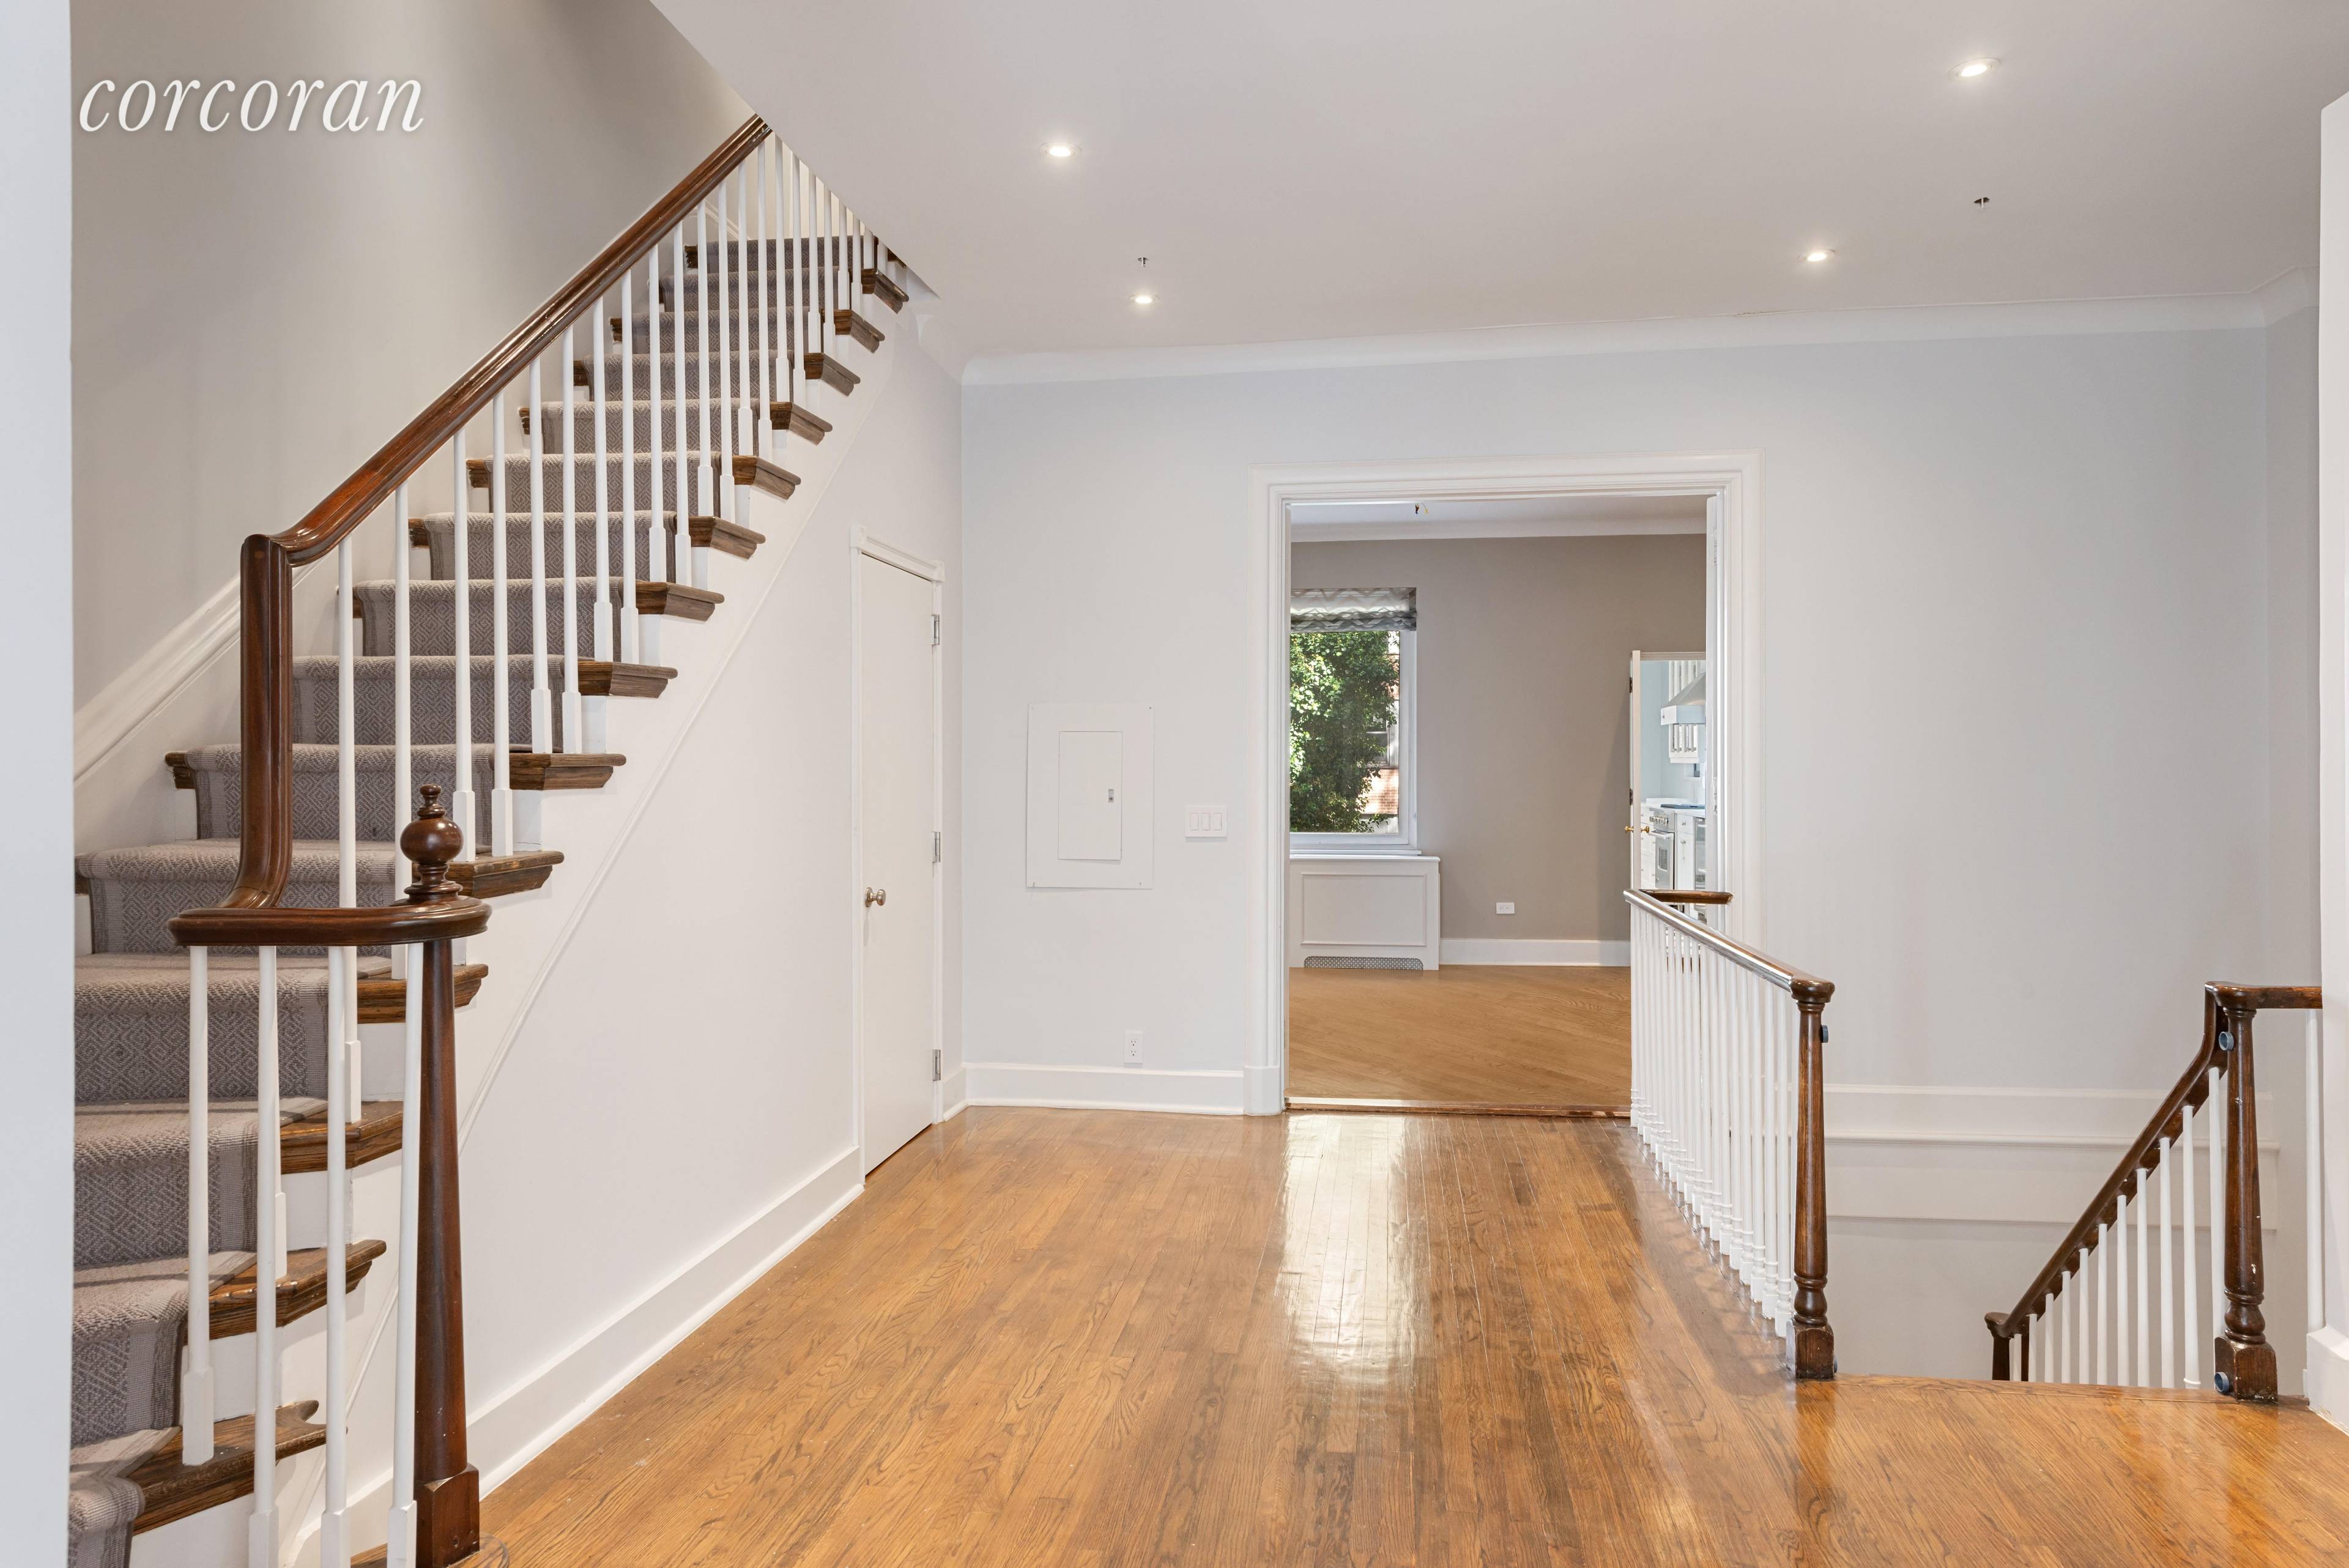 Townhouse living on one of the most desirable residential blocks on the Upper East Side.